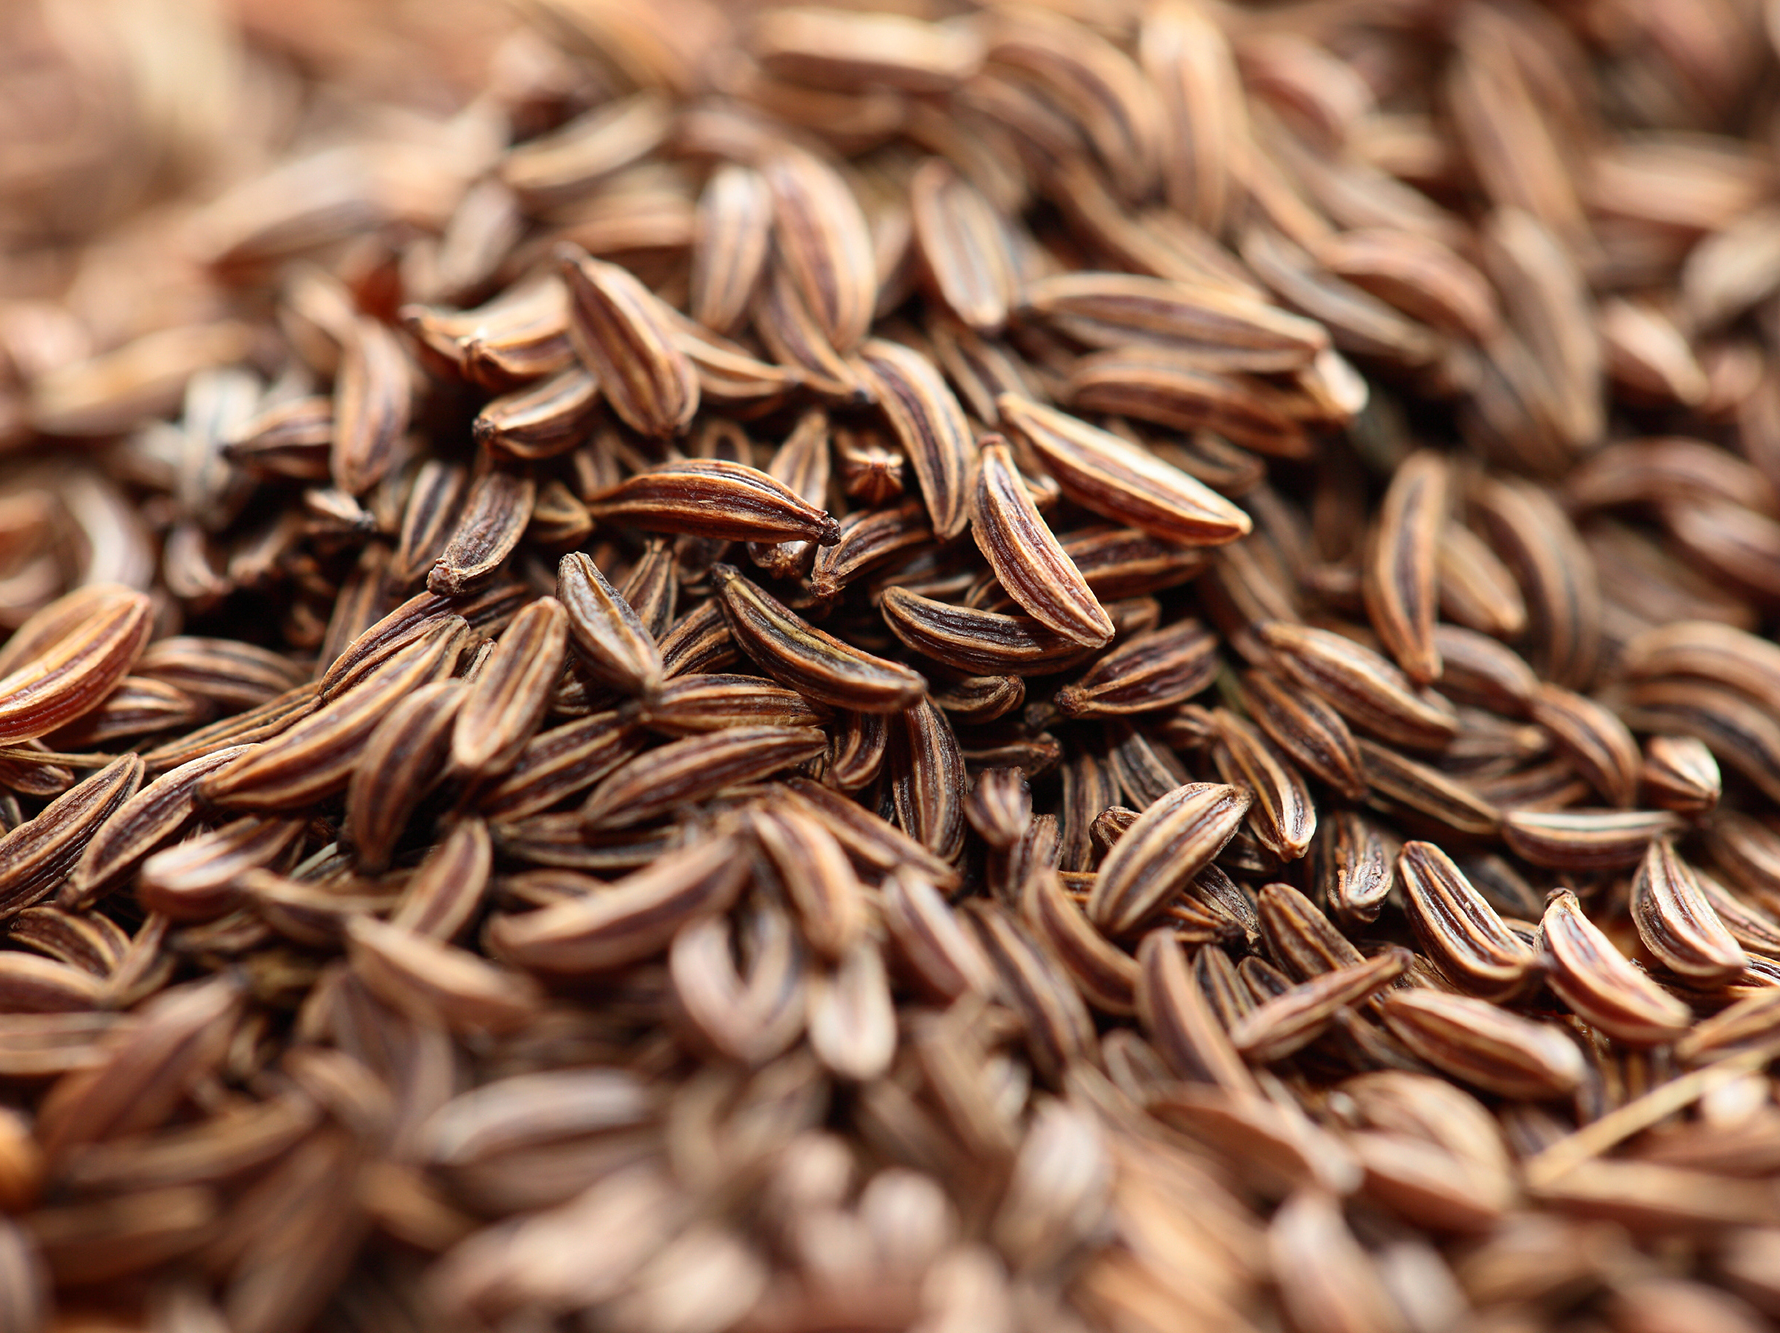 The cuisines of the classical world made use of cumin both as a flavoring and a drug. Photo: iStockphoto